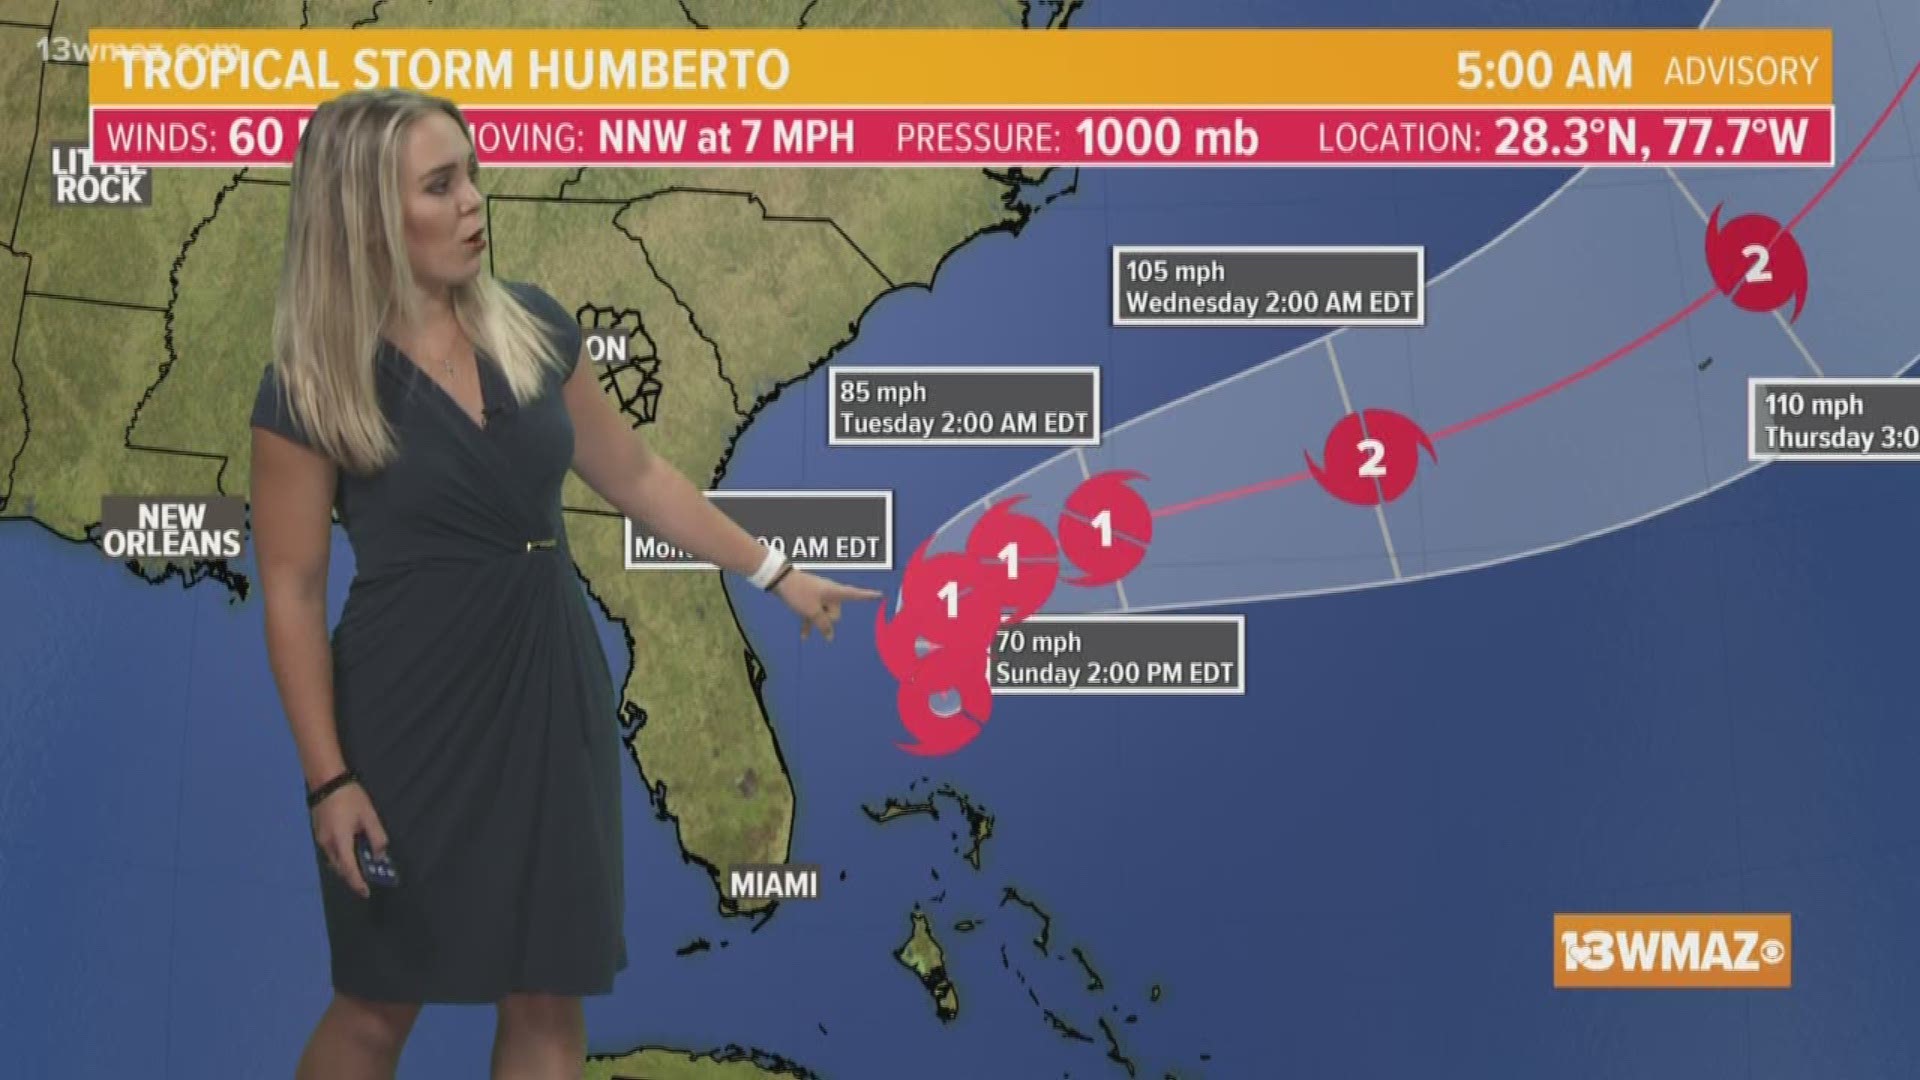 Humberto remains a tropical storm as of Sunday morning. Here’s the latest radars, models, tracks, and forecast for Georgia from Meteorologist Courteney Jacobazzi. For more Central Georgia weather, visit 13wmaz.com/weather